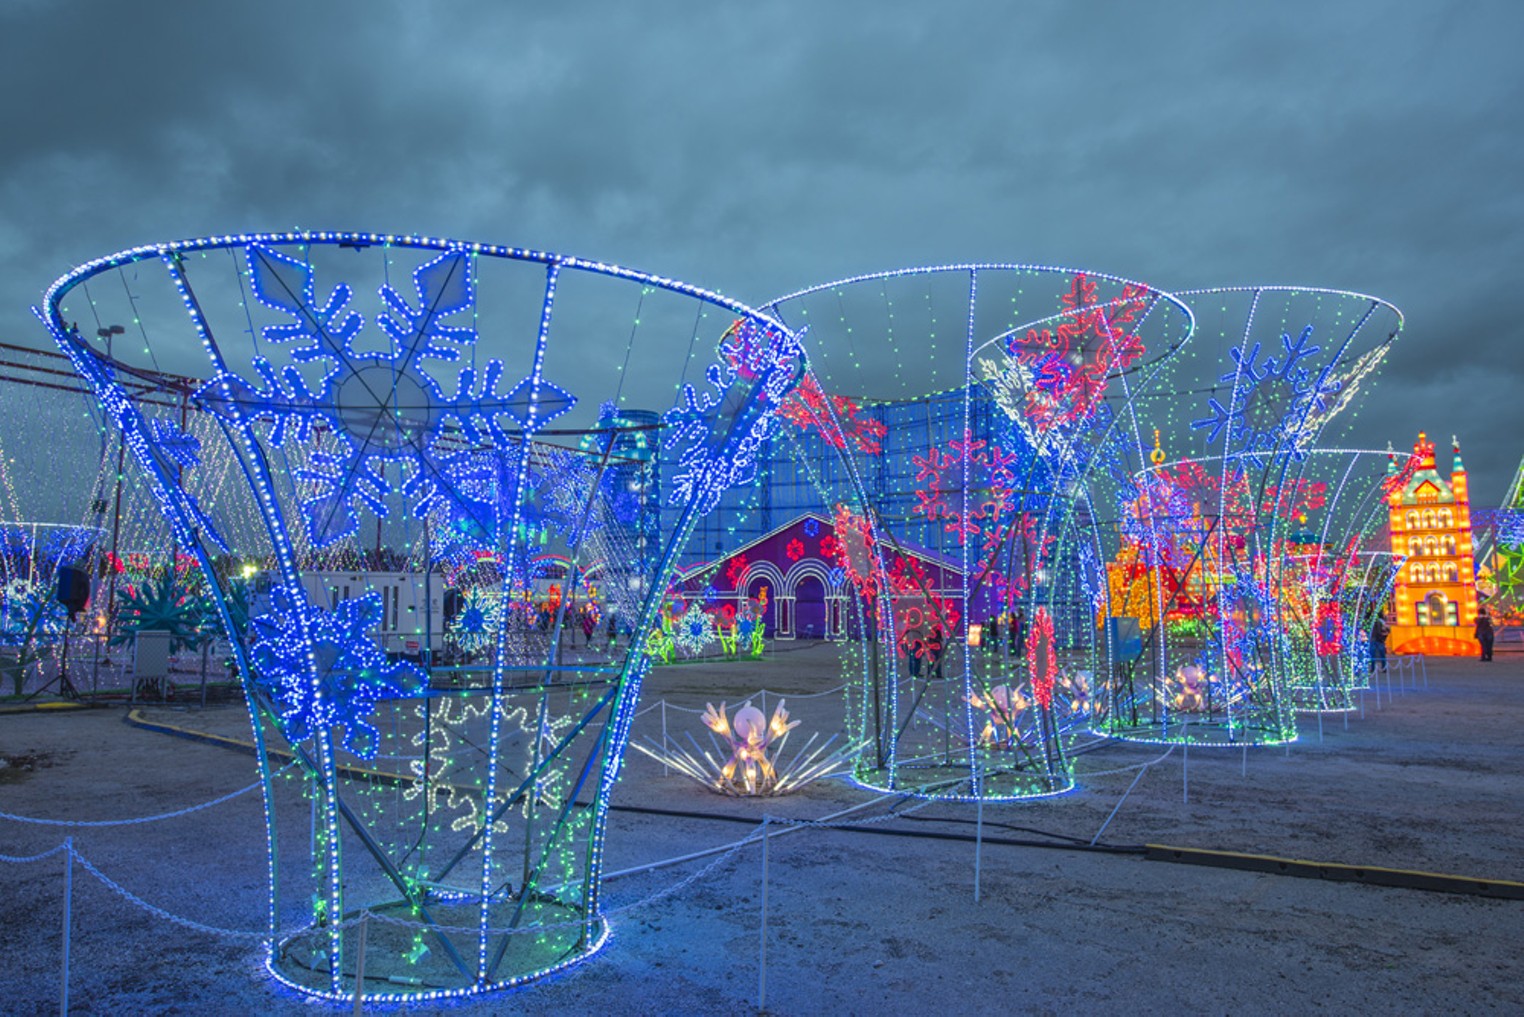 Magical Winter Lights Is A Must-See Holiday Treat | Houston | Houston ...